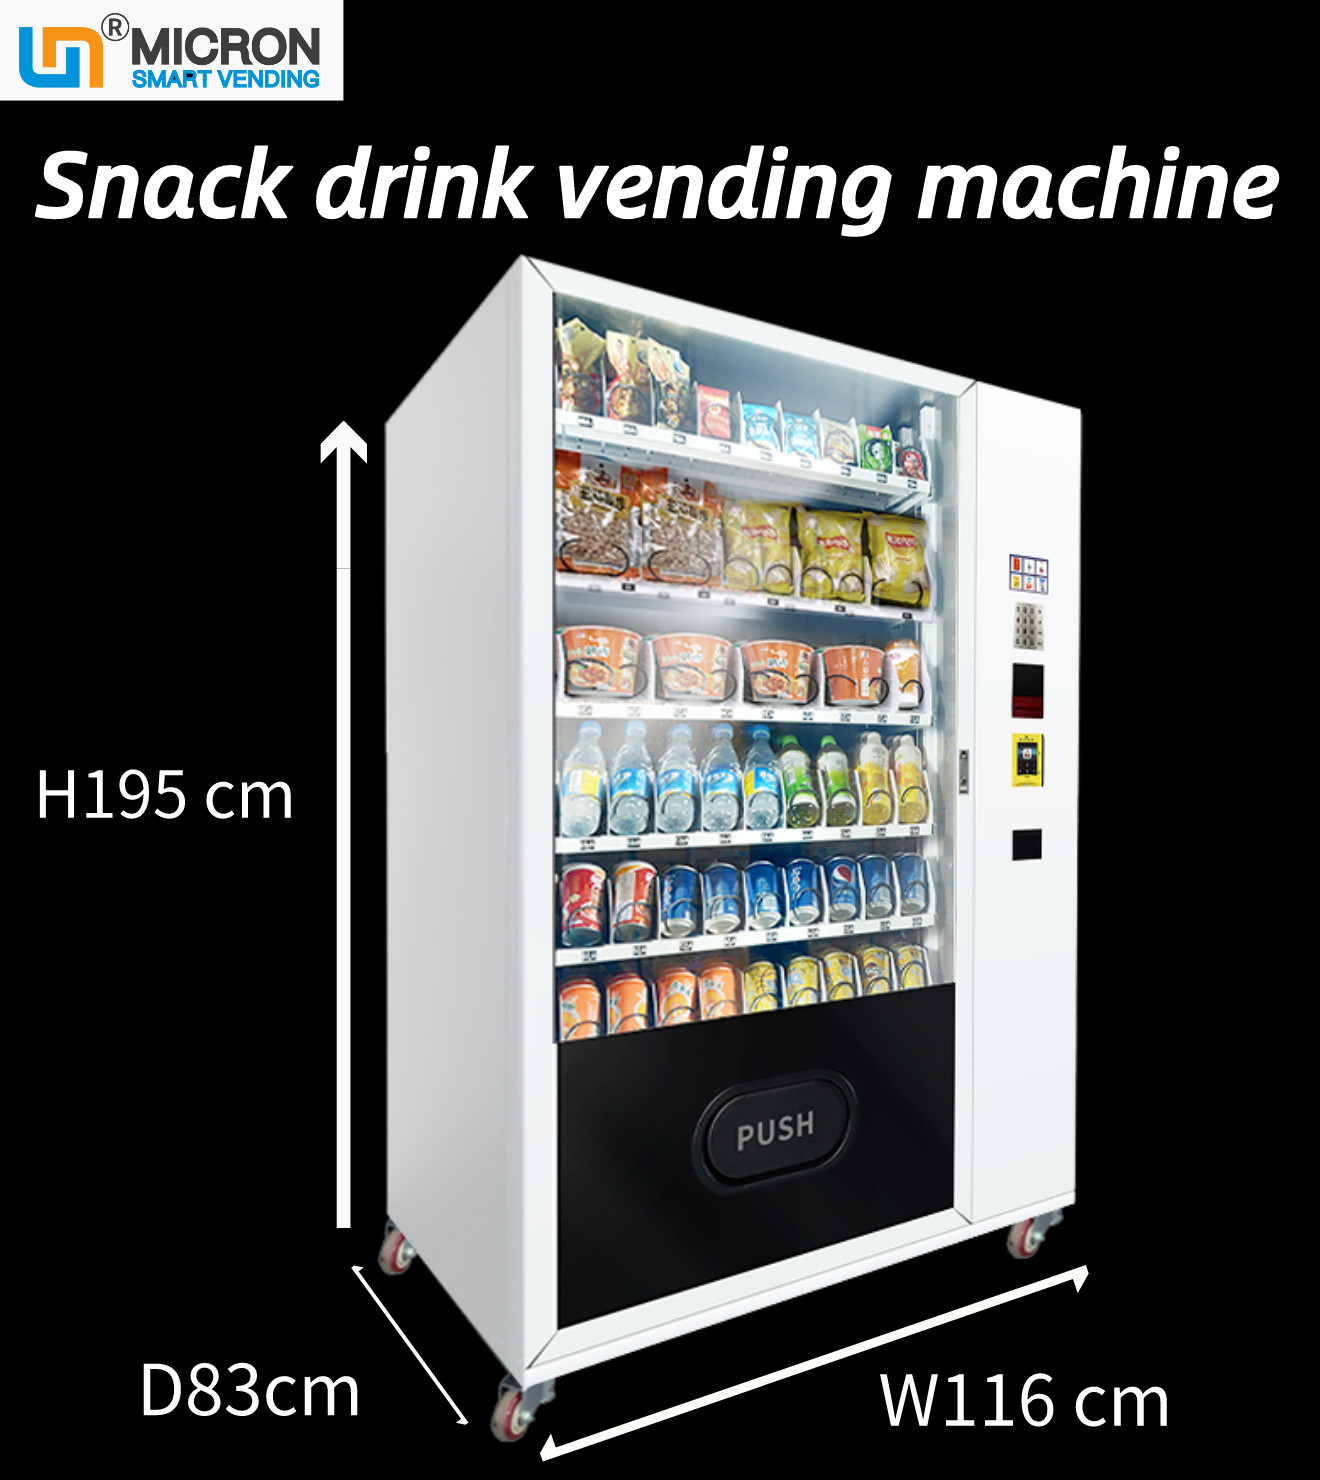 Quality Micron Smart Cola Canned Beverages vending machine Drink Snack Vending Machine Large Capacity for sale